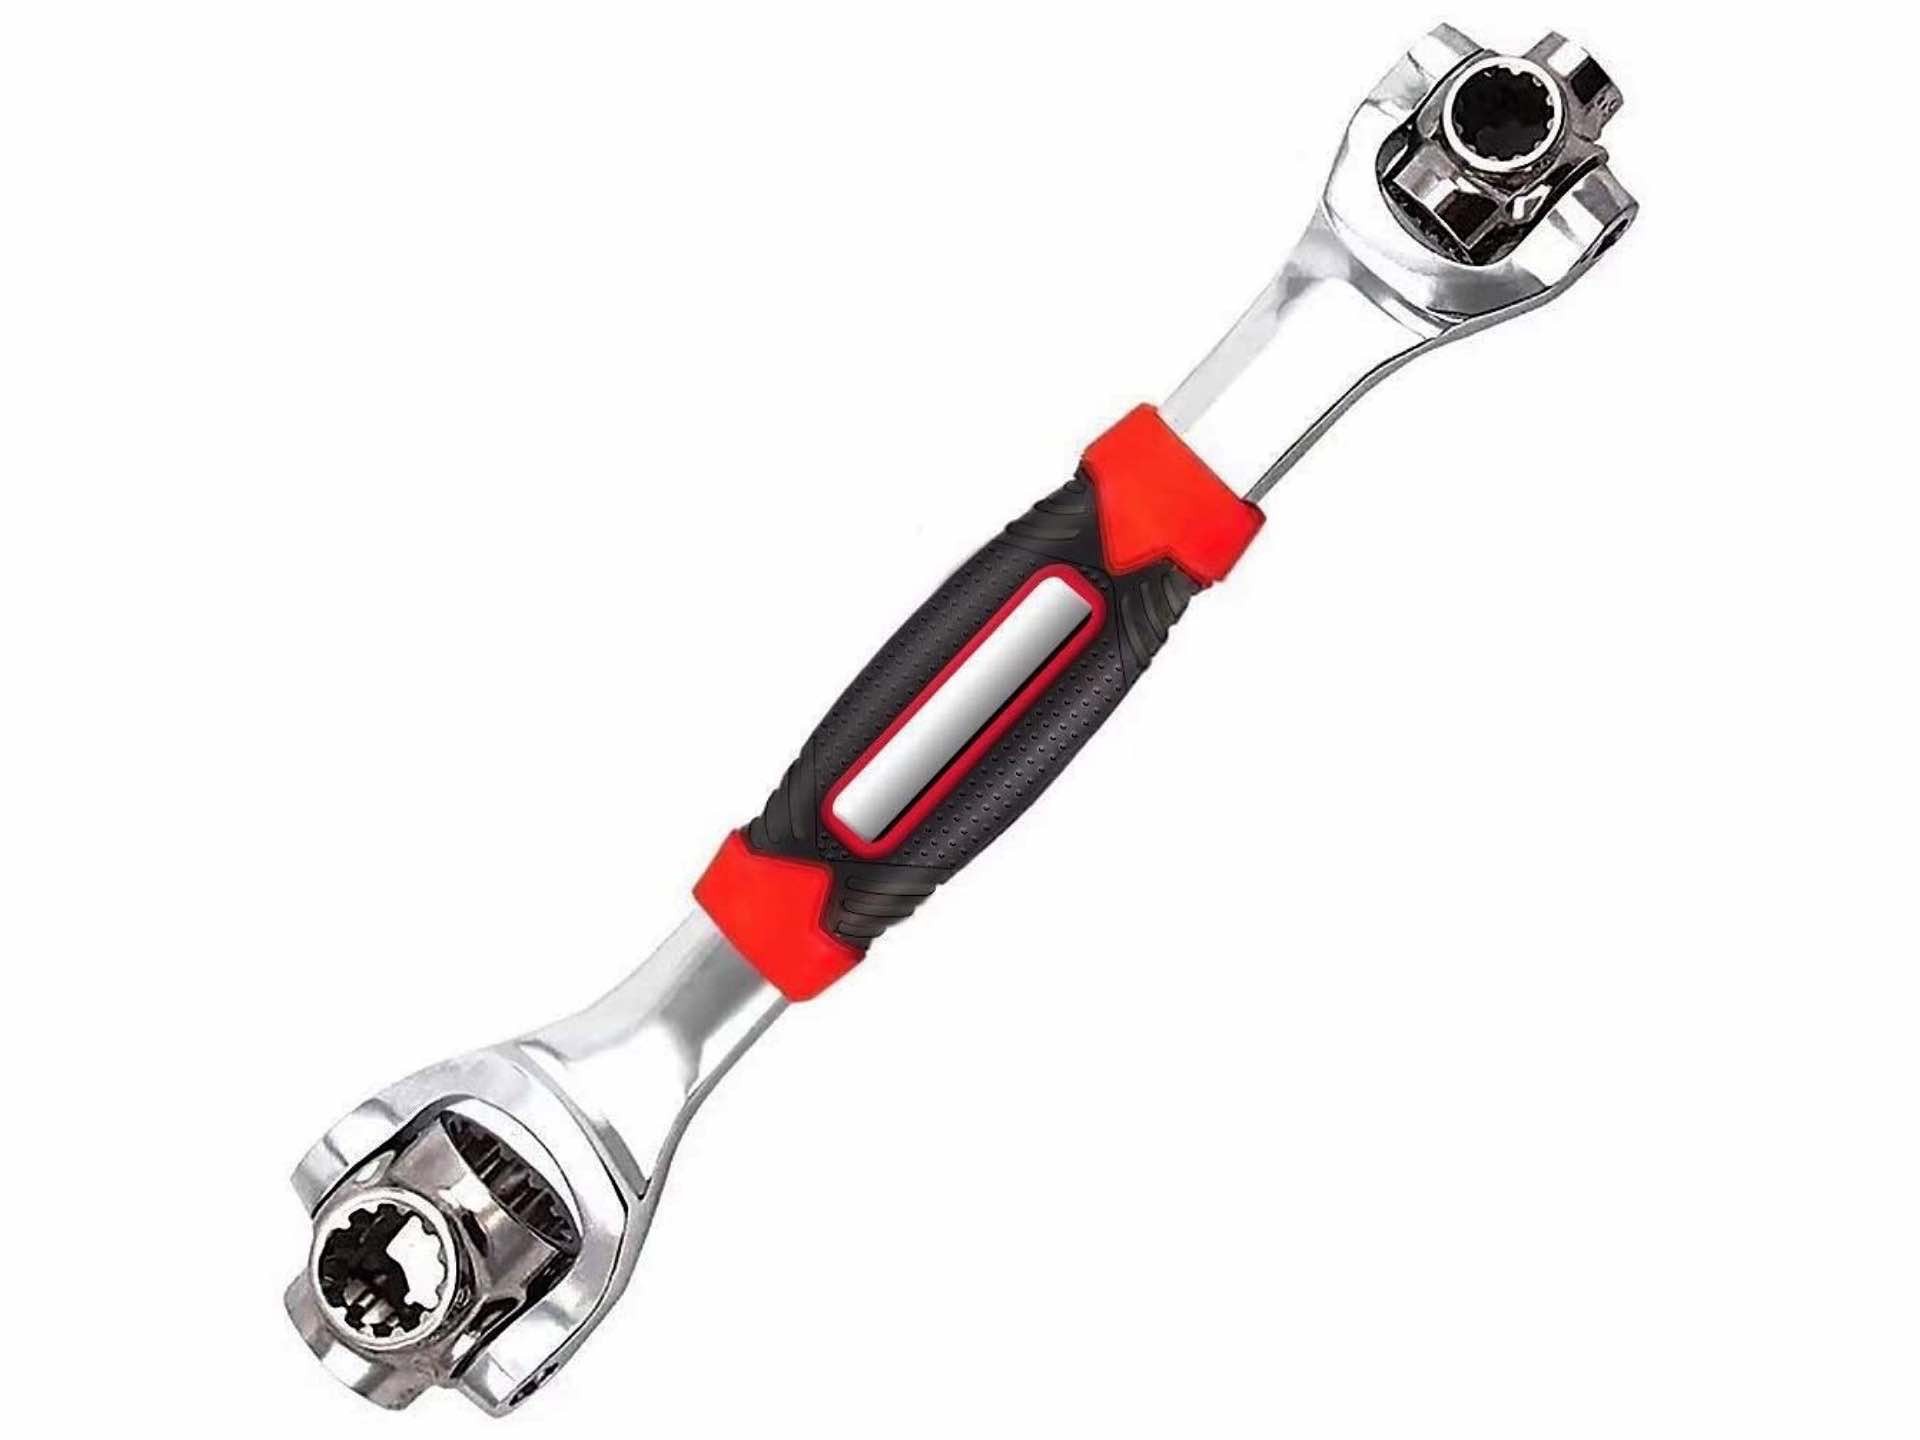 iPstyle 48-in-1 socket wrench. ($20)